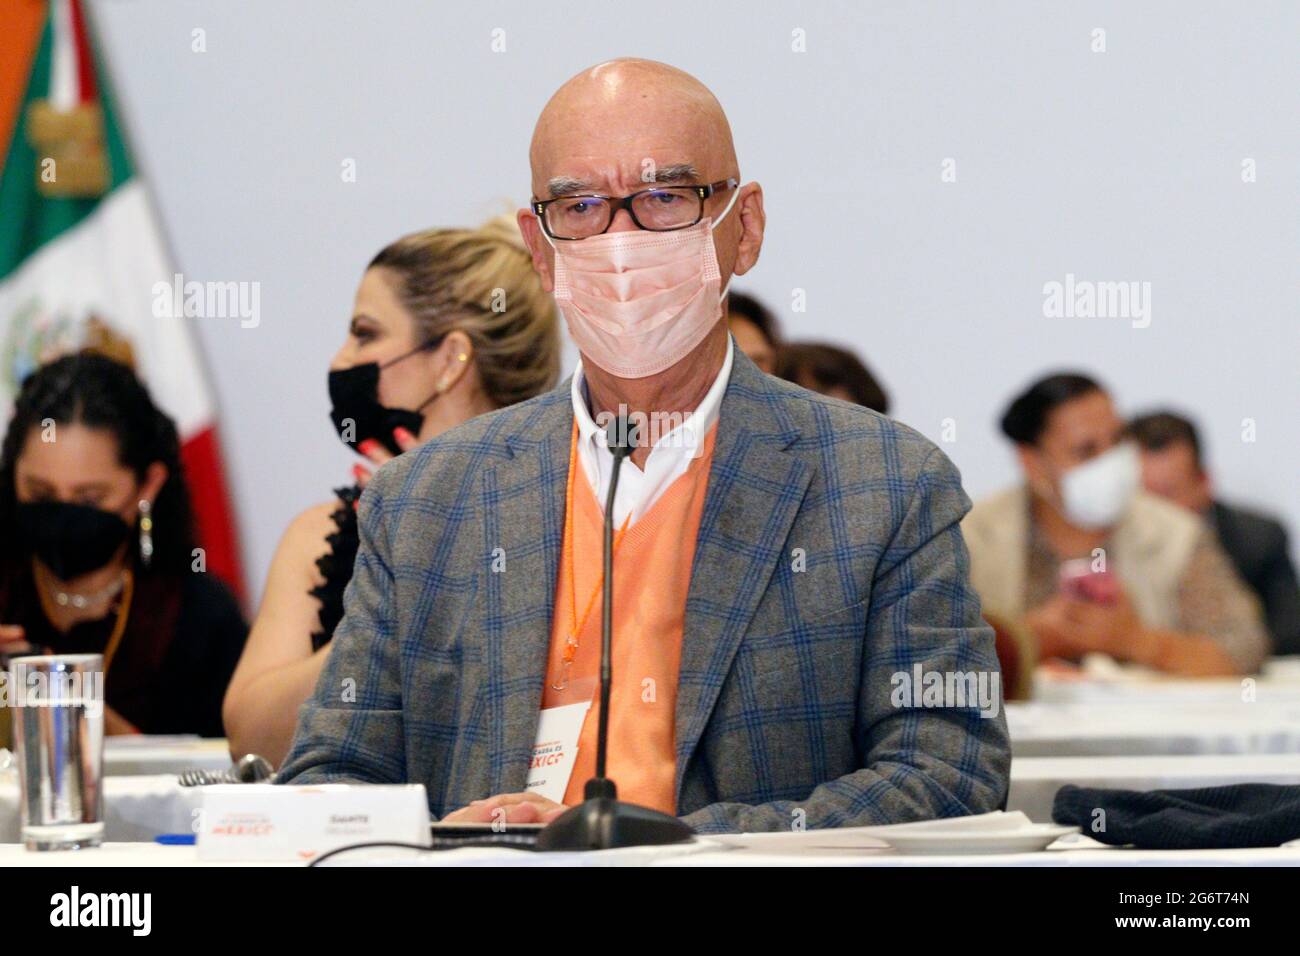 MEXICO CITY, MEXICO - JULY 5: Tthe senator of the republic and founder of  the Citizen Movement party, Dante Delgado, during the XXI Session of the  National Council on July 5, 2021